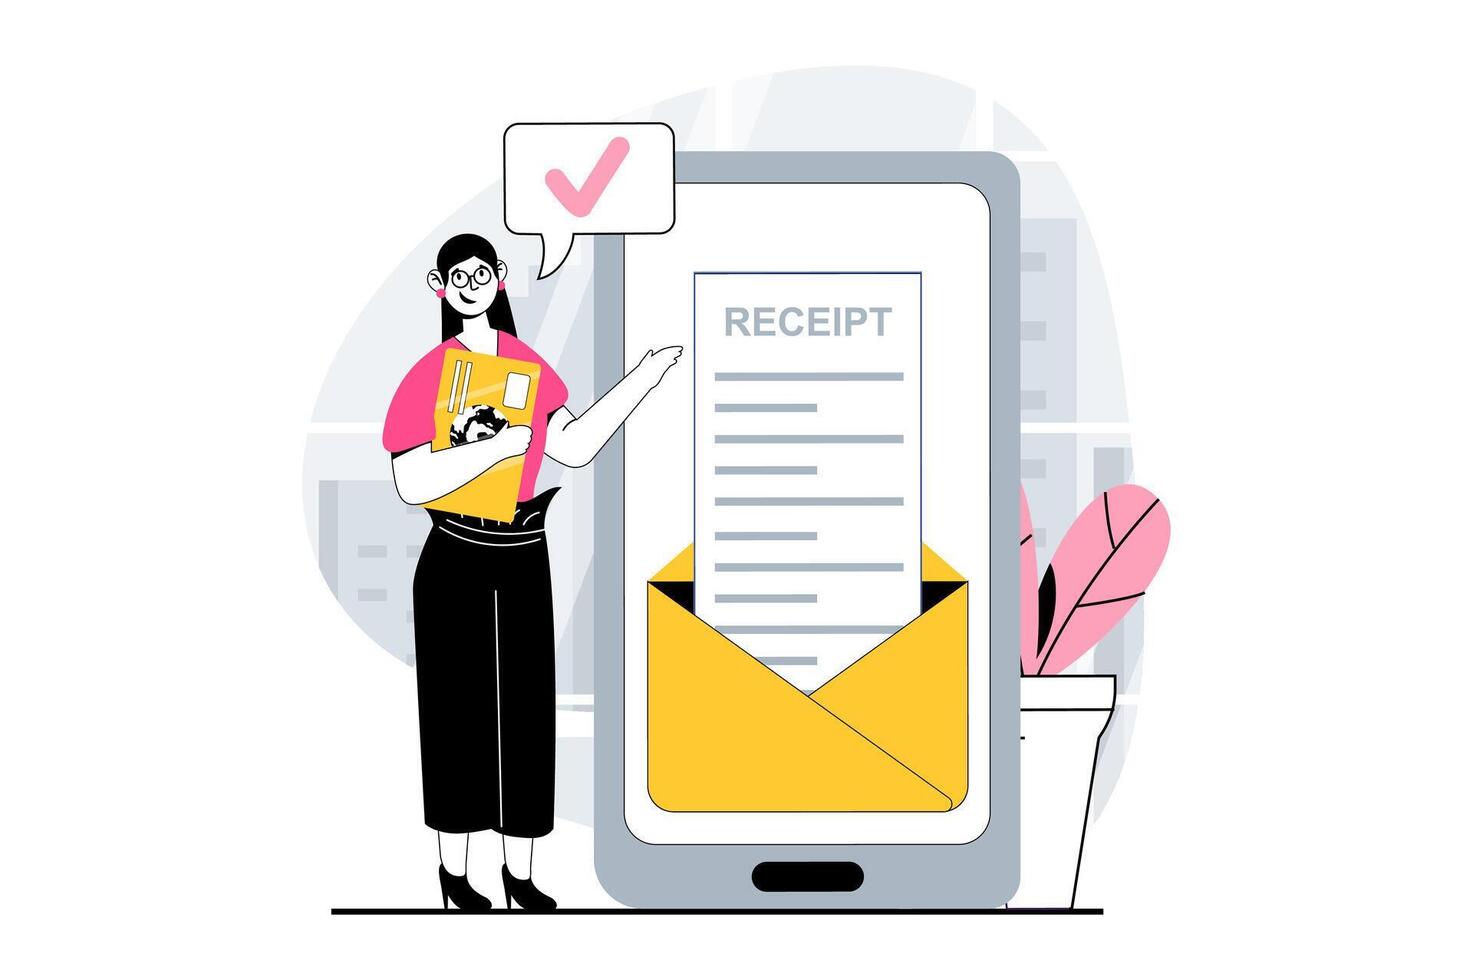 Electronic receipt concept with people scene in flat design for web. Woman making transactions with credit card and receiving check. Vector illustration for social media banner, marketing material.